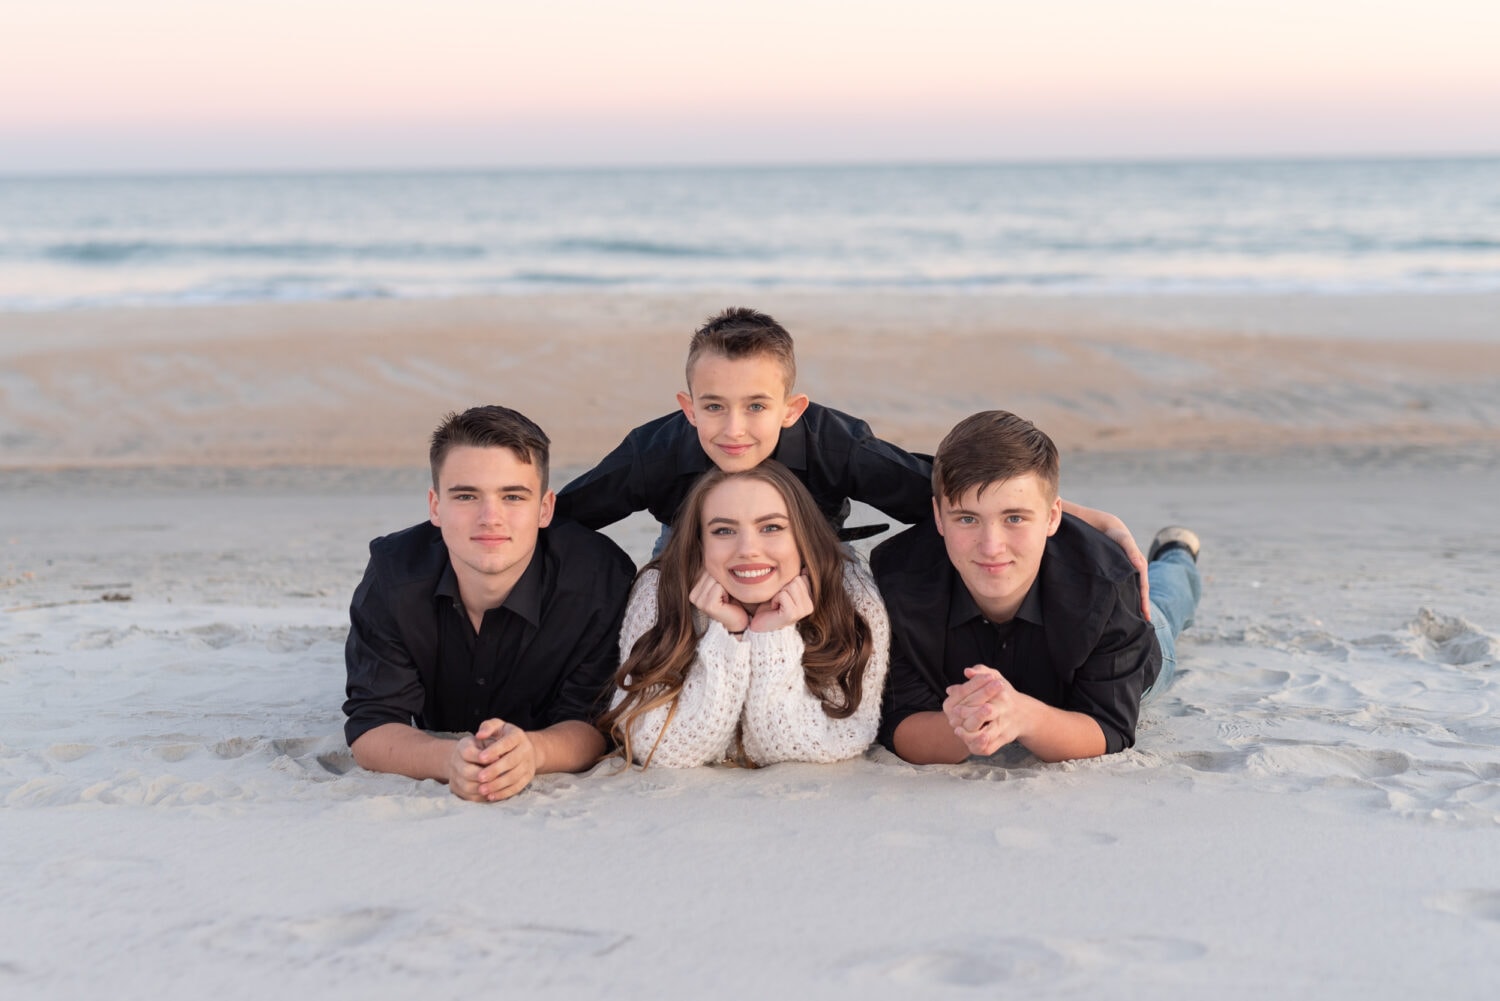 Little brother laying on top of siblings in the sand -